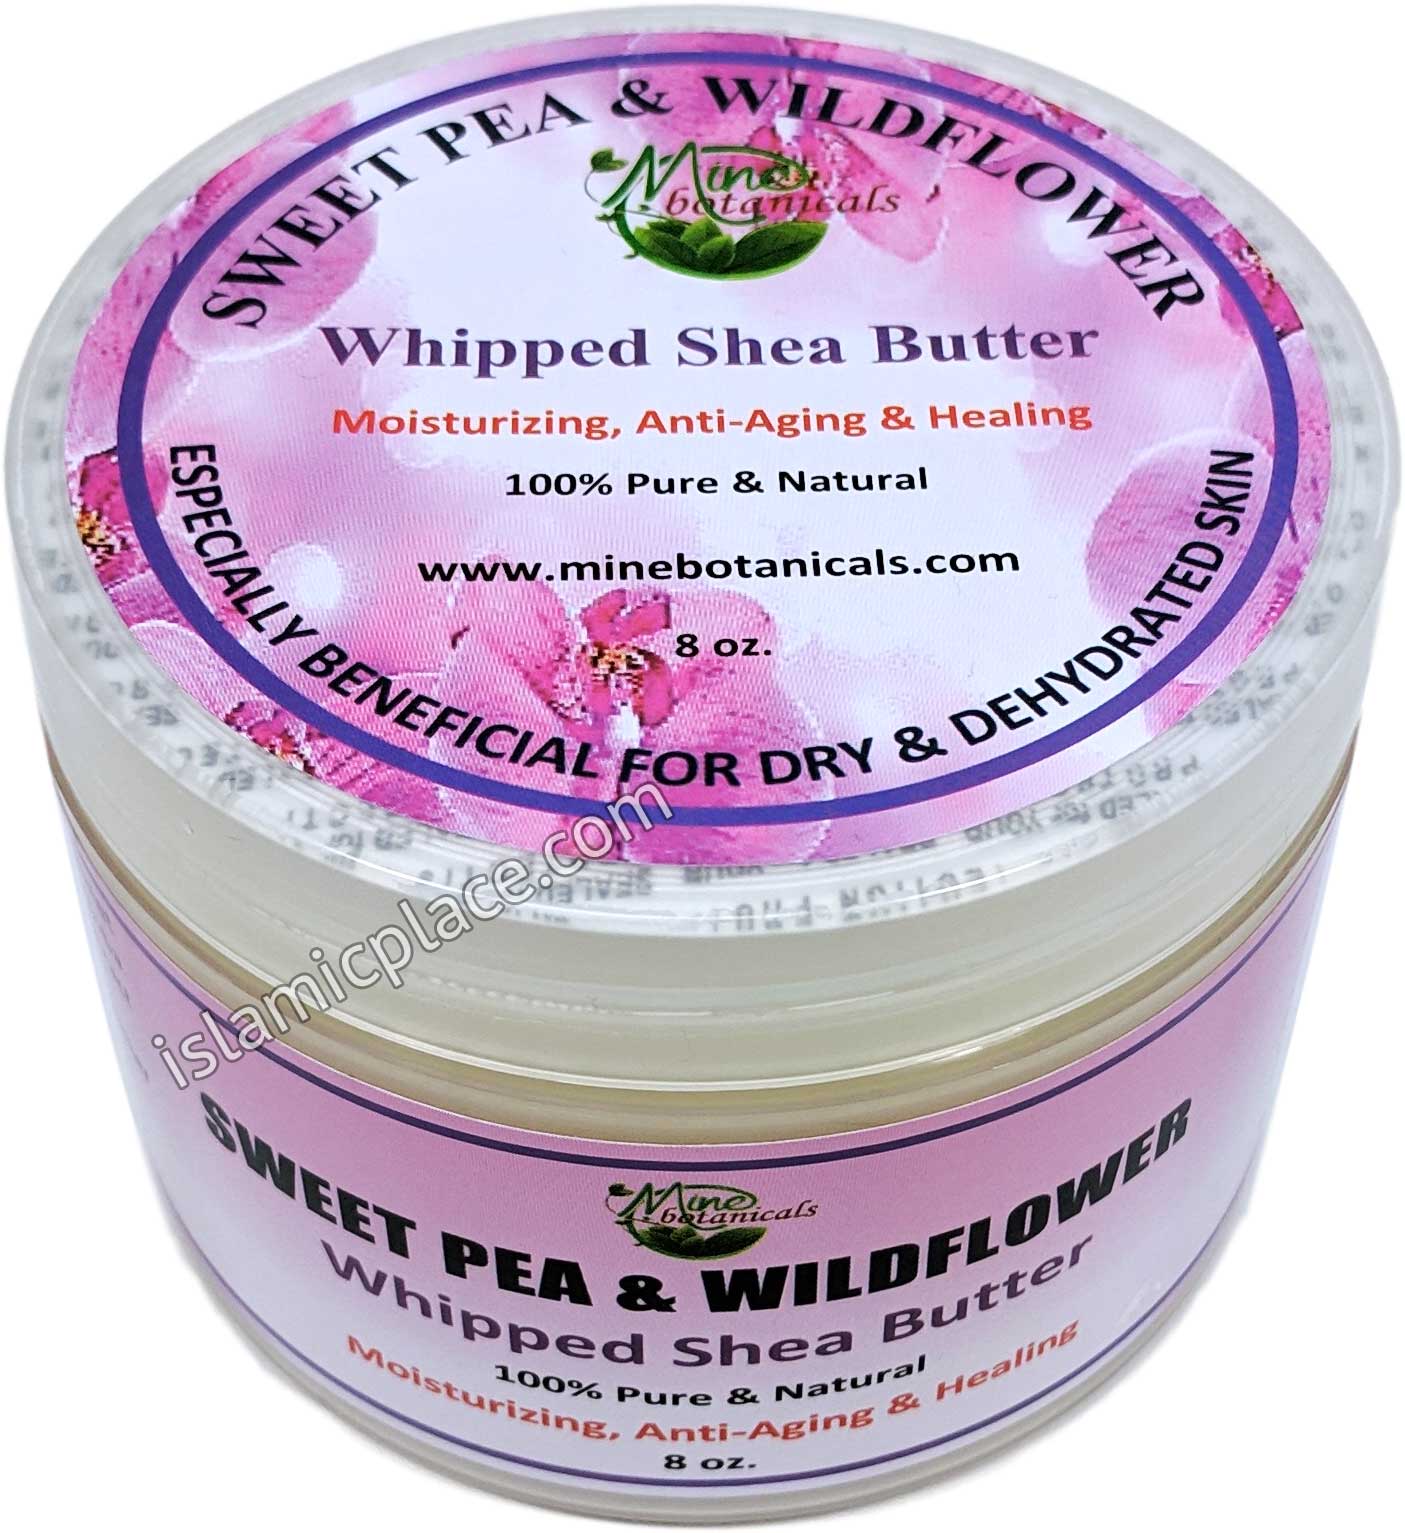 Sweet Pea & Wildflower Whipped Shea Butter